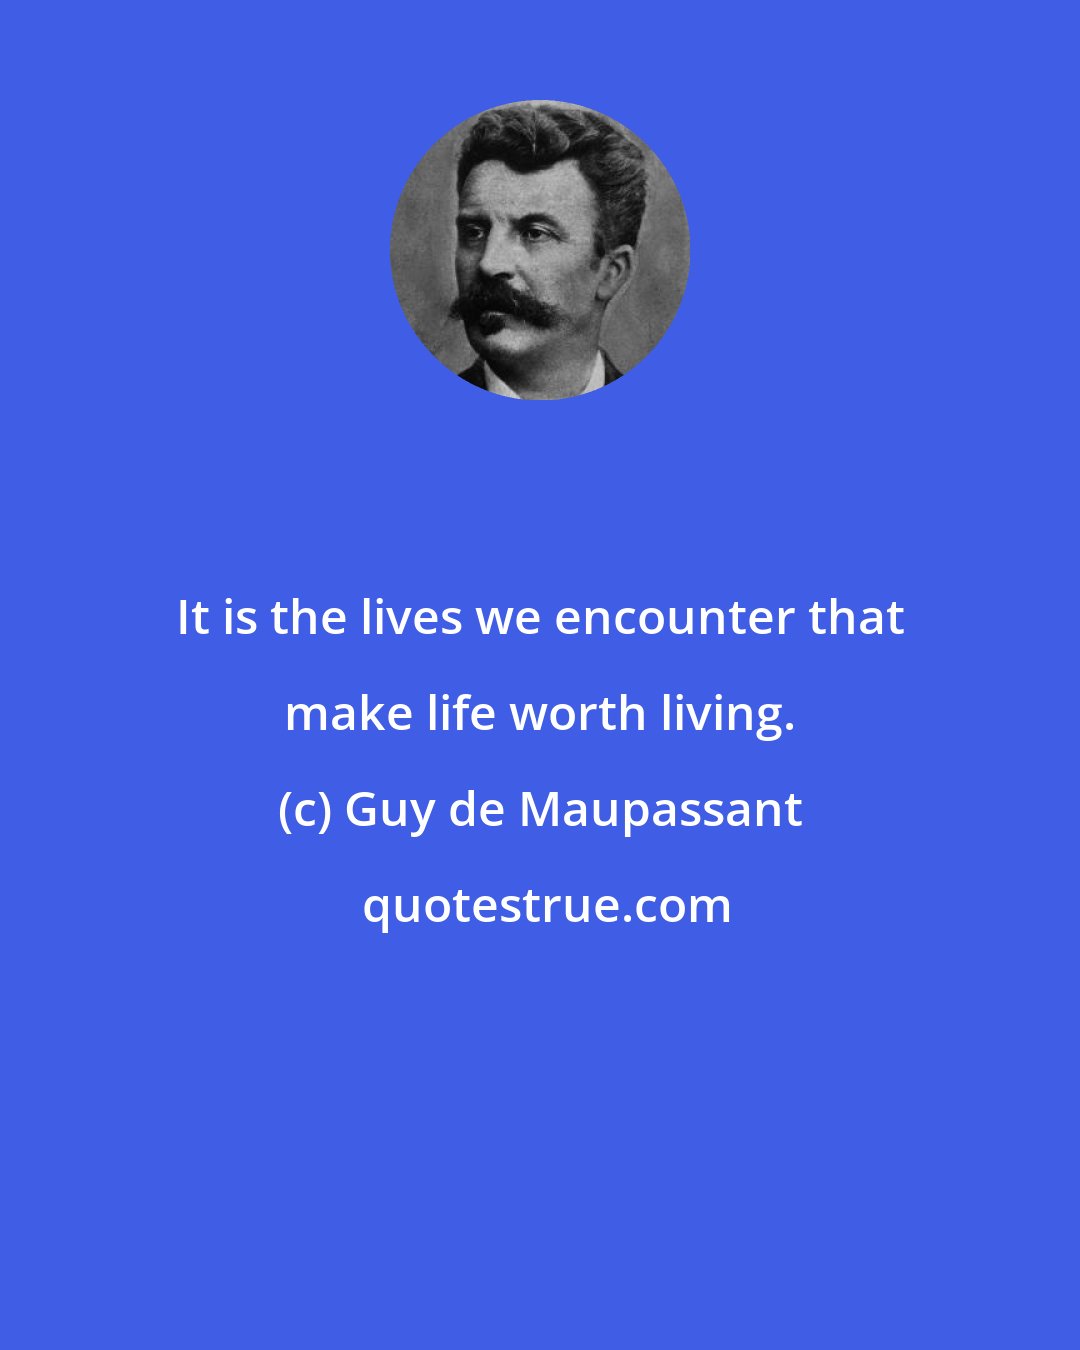 Guy de Maupassant: It is the lives we encounter that make life worth living.